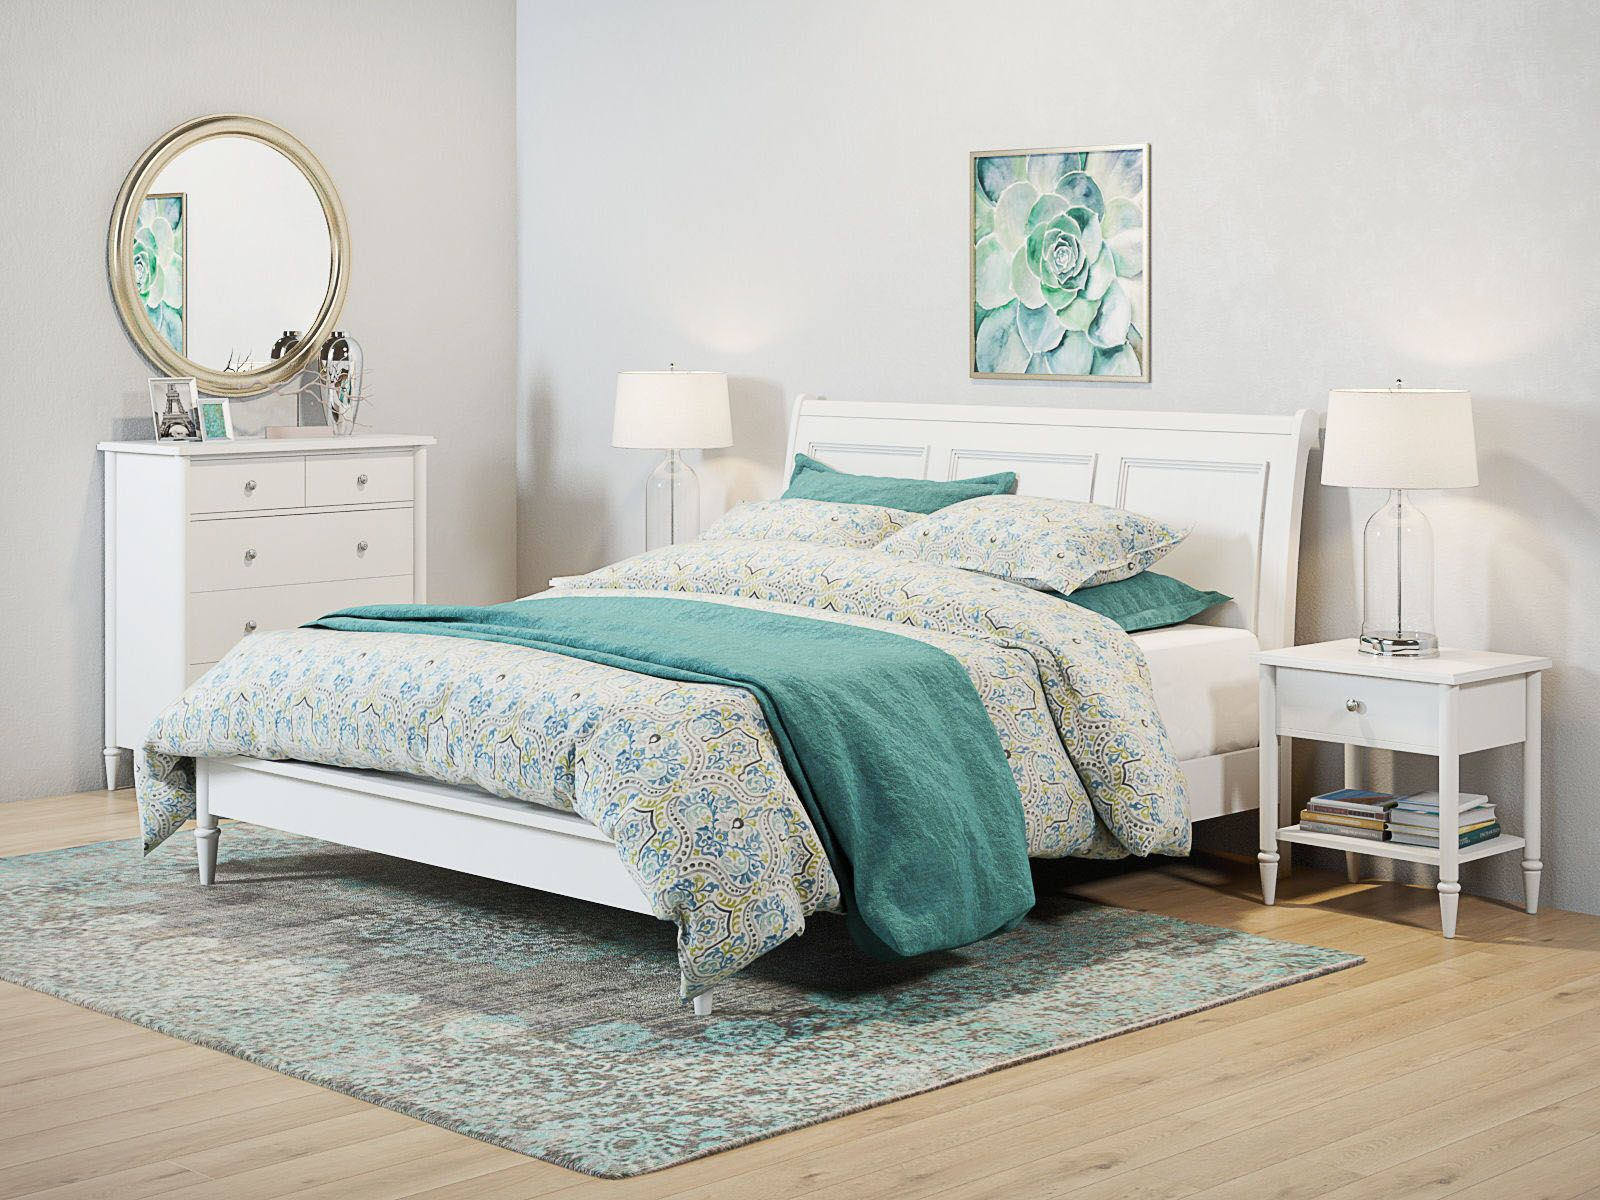 Guest Bedrooms With Captivating Twin Bed Designs Twin Bedroom Sets in size 1600 X 1200